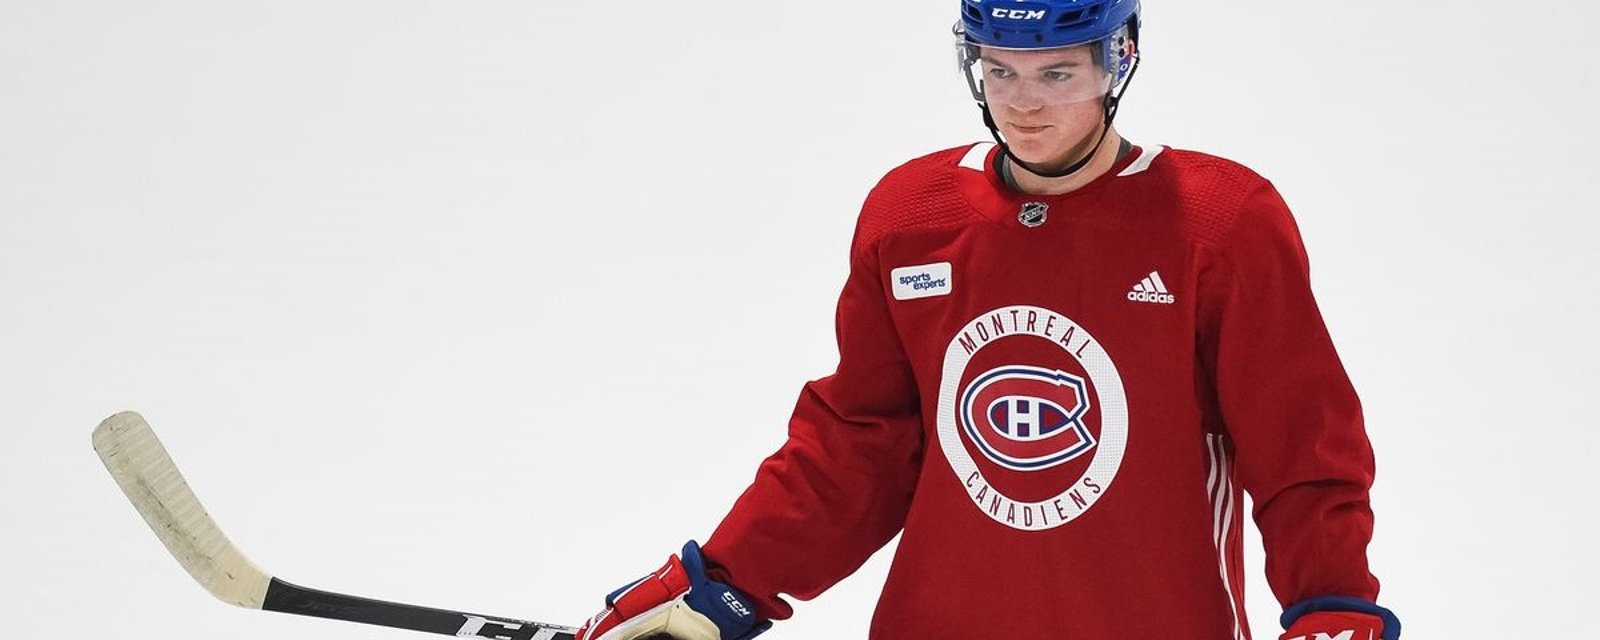 Rumor: Oilers prospect kicked off his team in order to make room for Habs prospect.